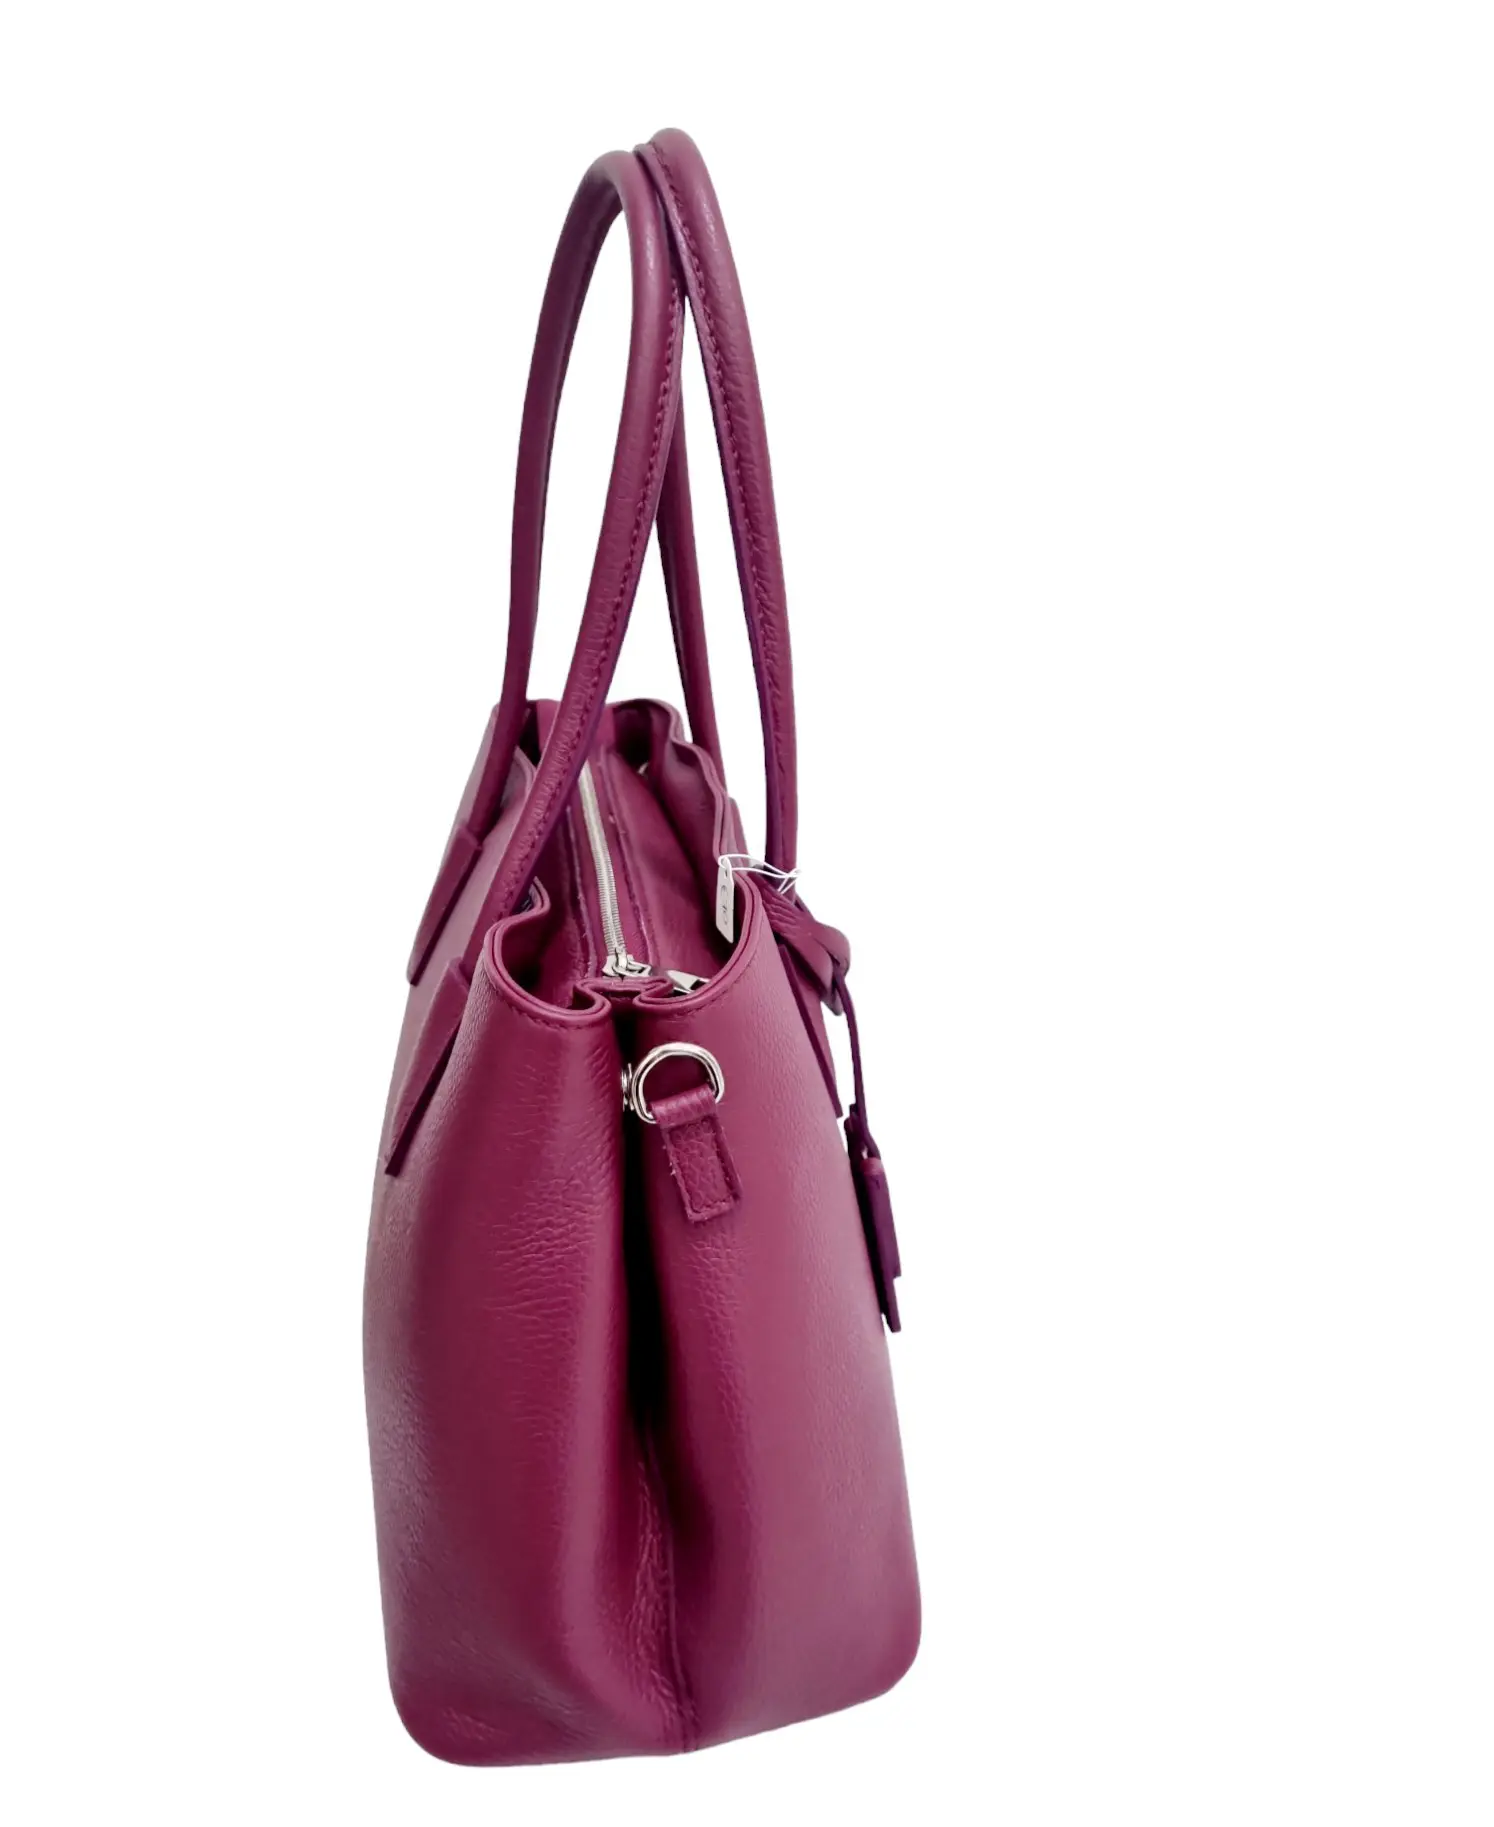 Genuine leather bag, made in Italy, with shoulder strap, wide handles, lined interior with three compartments, central zip and side pockets. cyclamen color measures L33 B15 H24 arm width 19cm